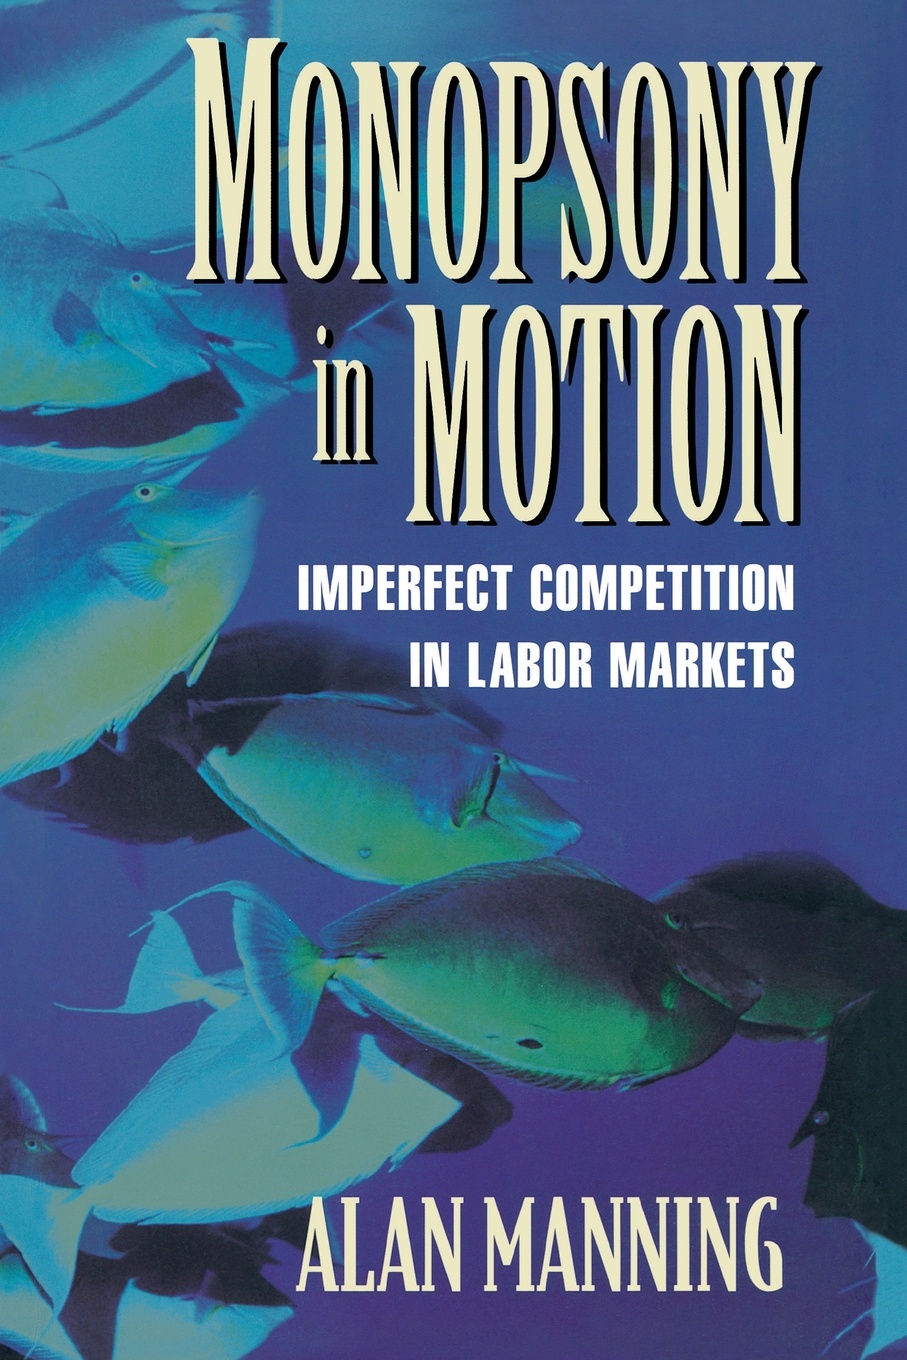 Monopsony in Motion. Imperfect Competition in Labor Markets